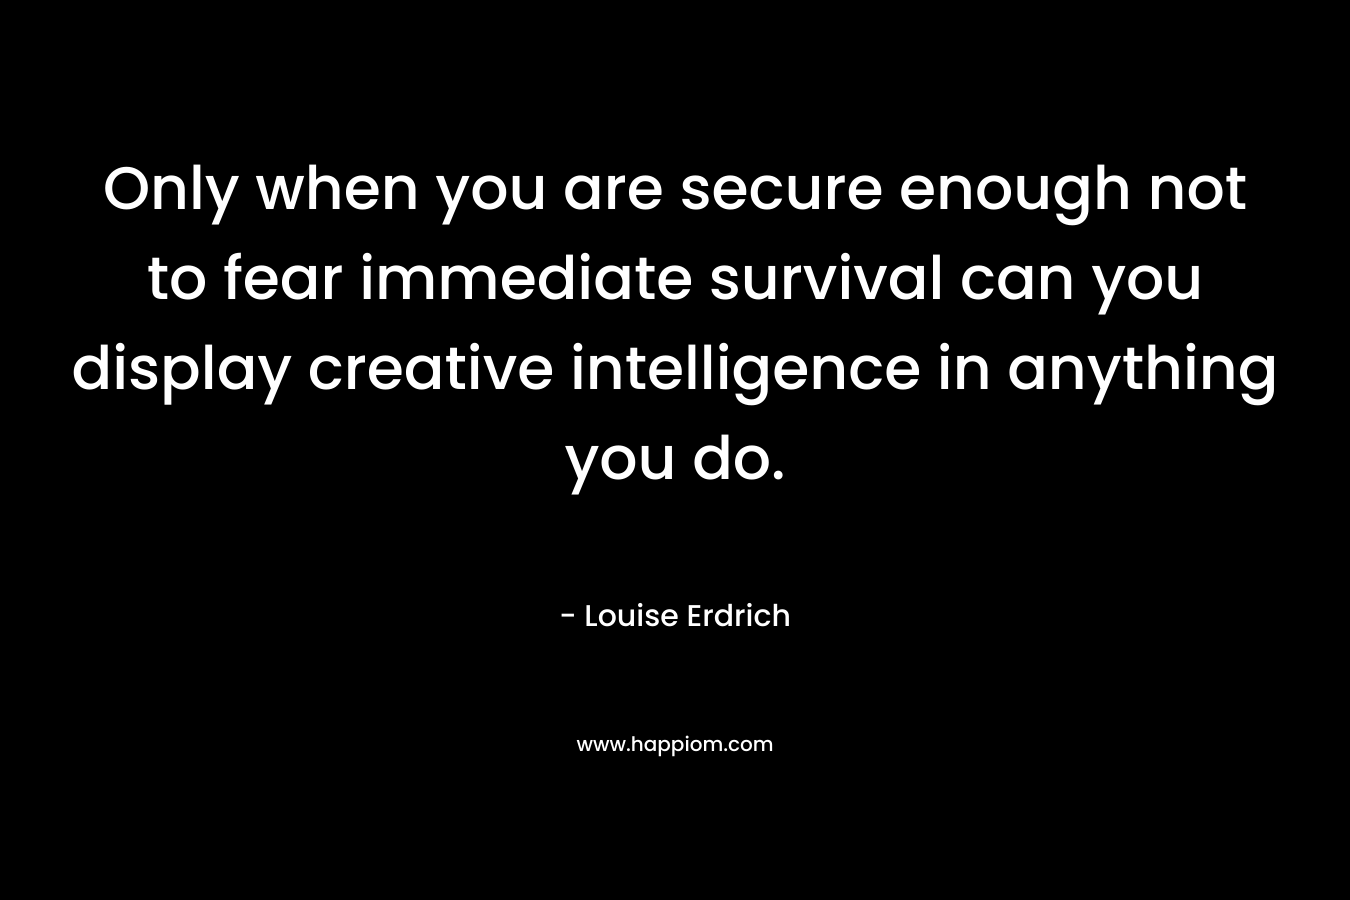 Only when you are secure enough not to fear immediate survival can you display creative intelligence in anything you do.